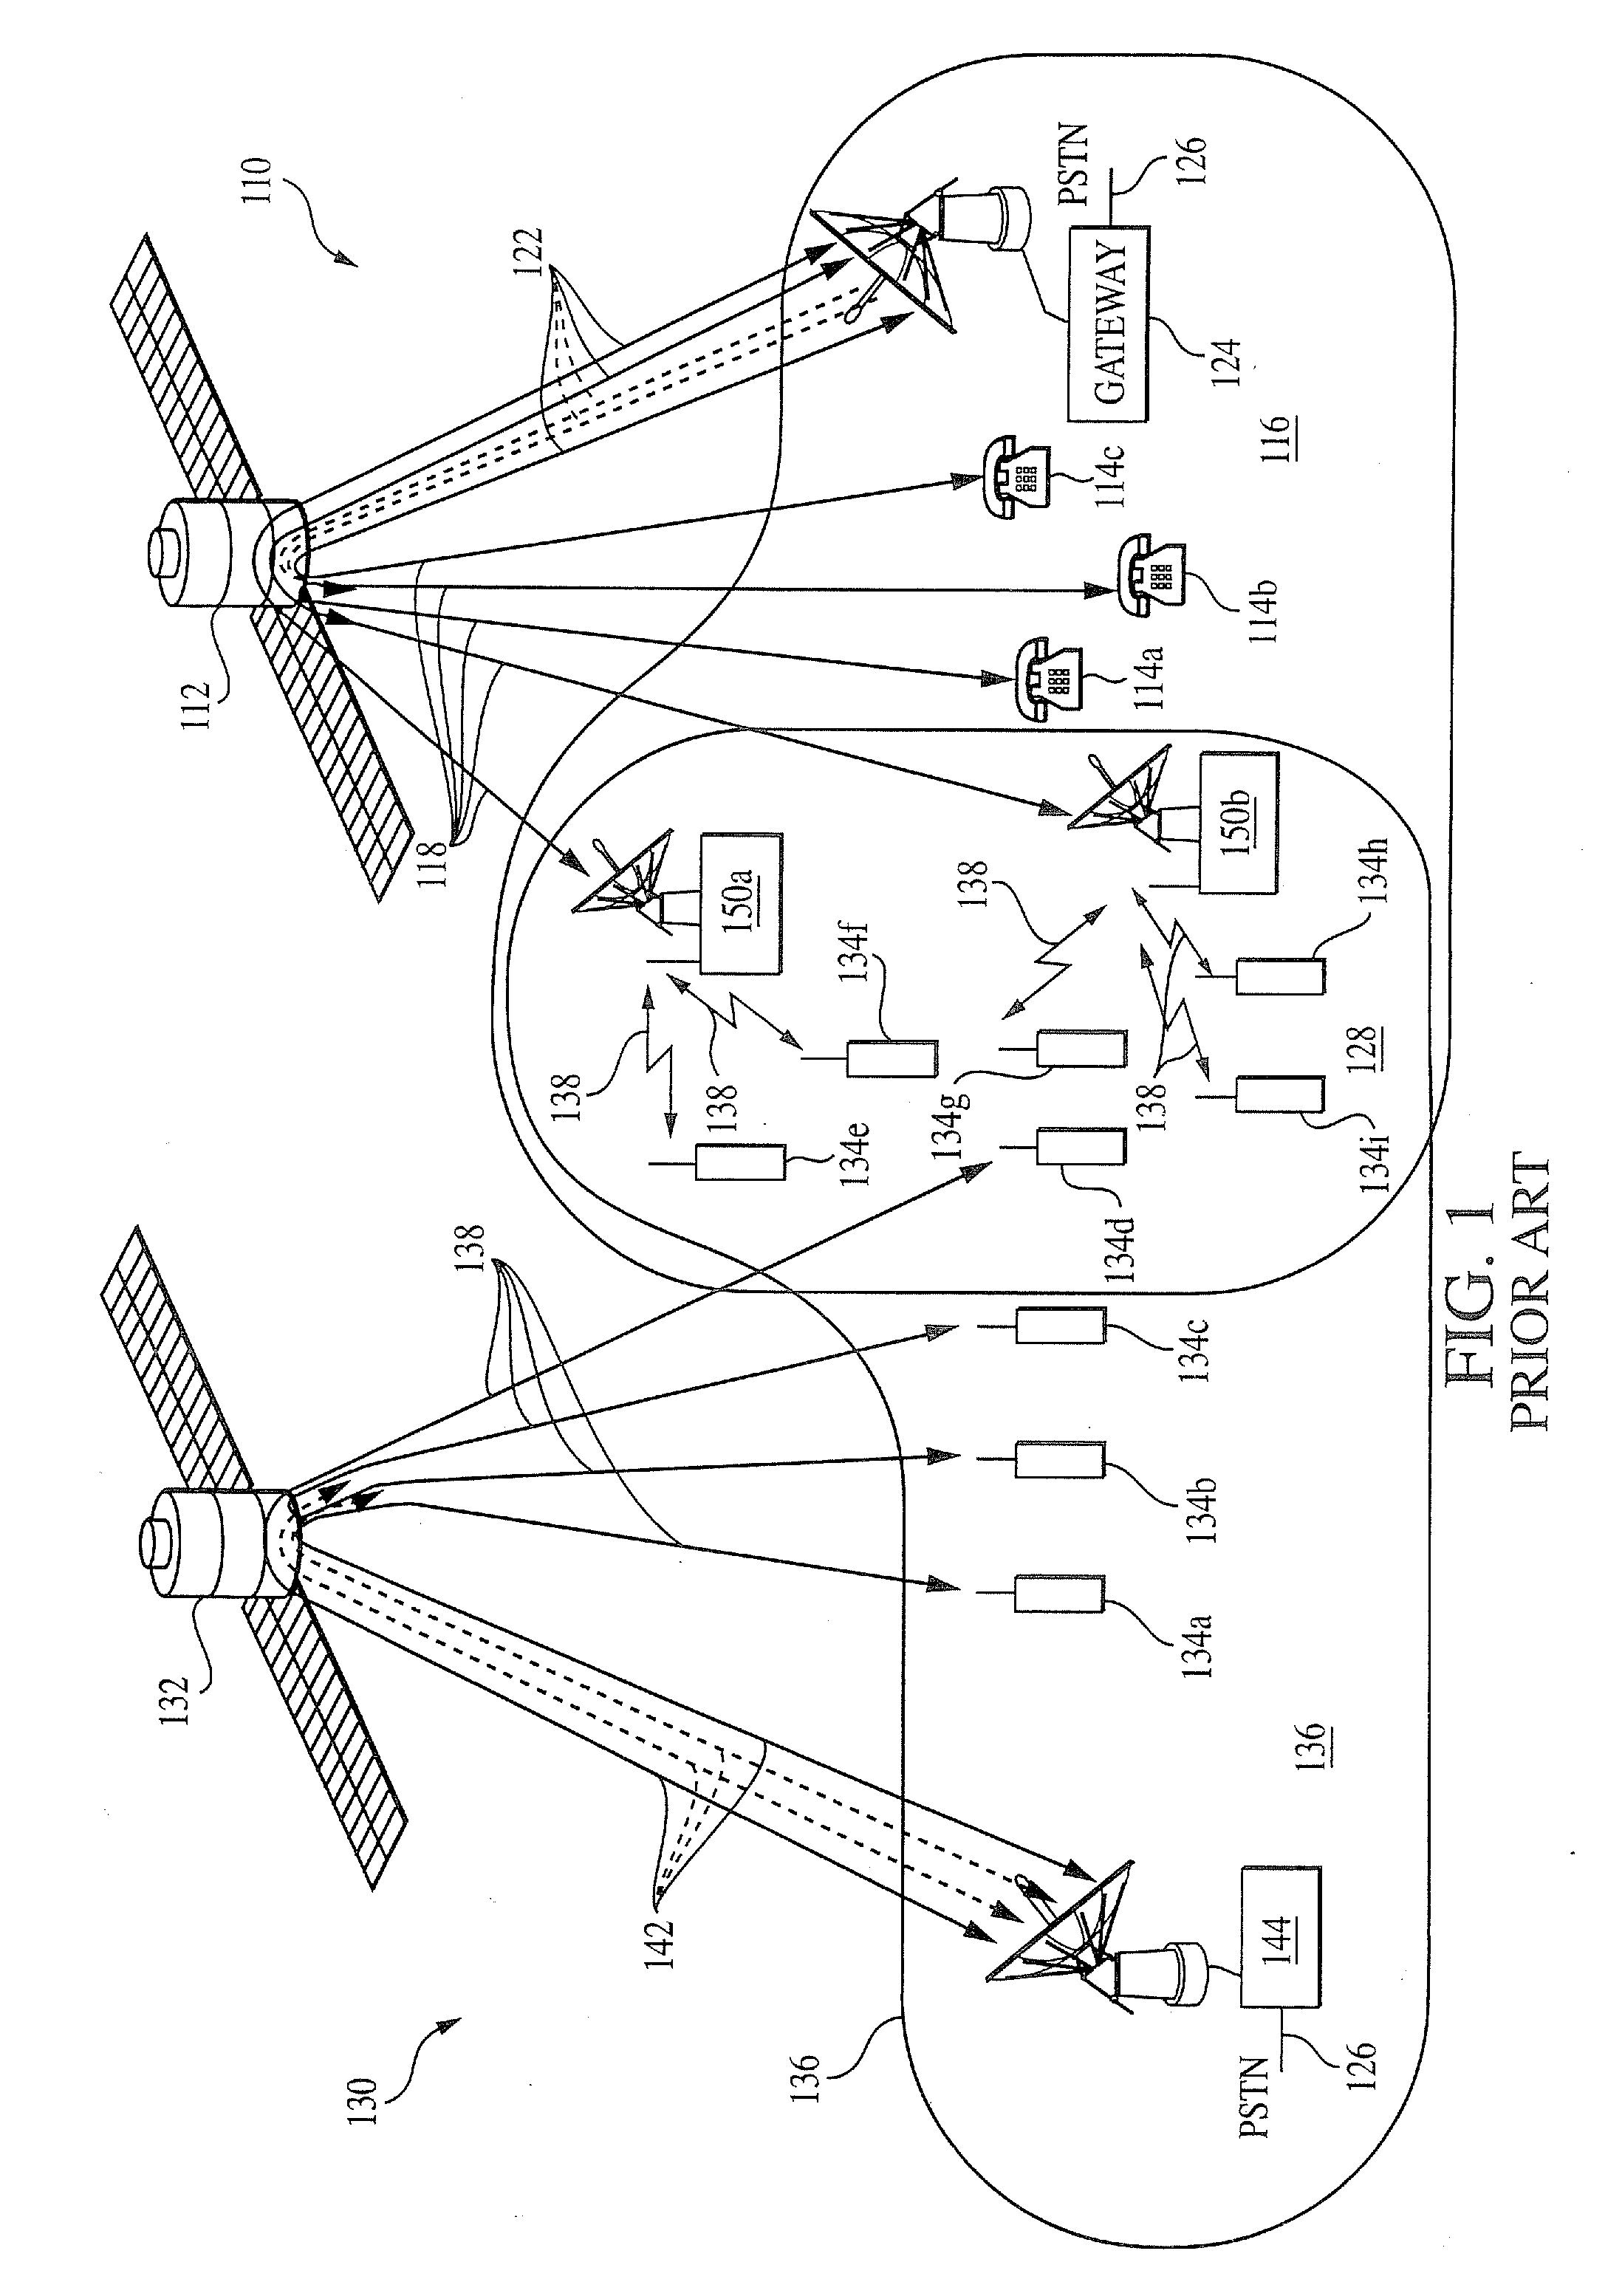 Systems and methods for transmitting electromagnetic energy over a wireless channel having sufficiently weak measured signal strength